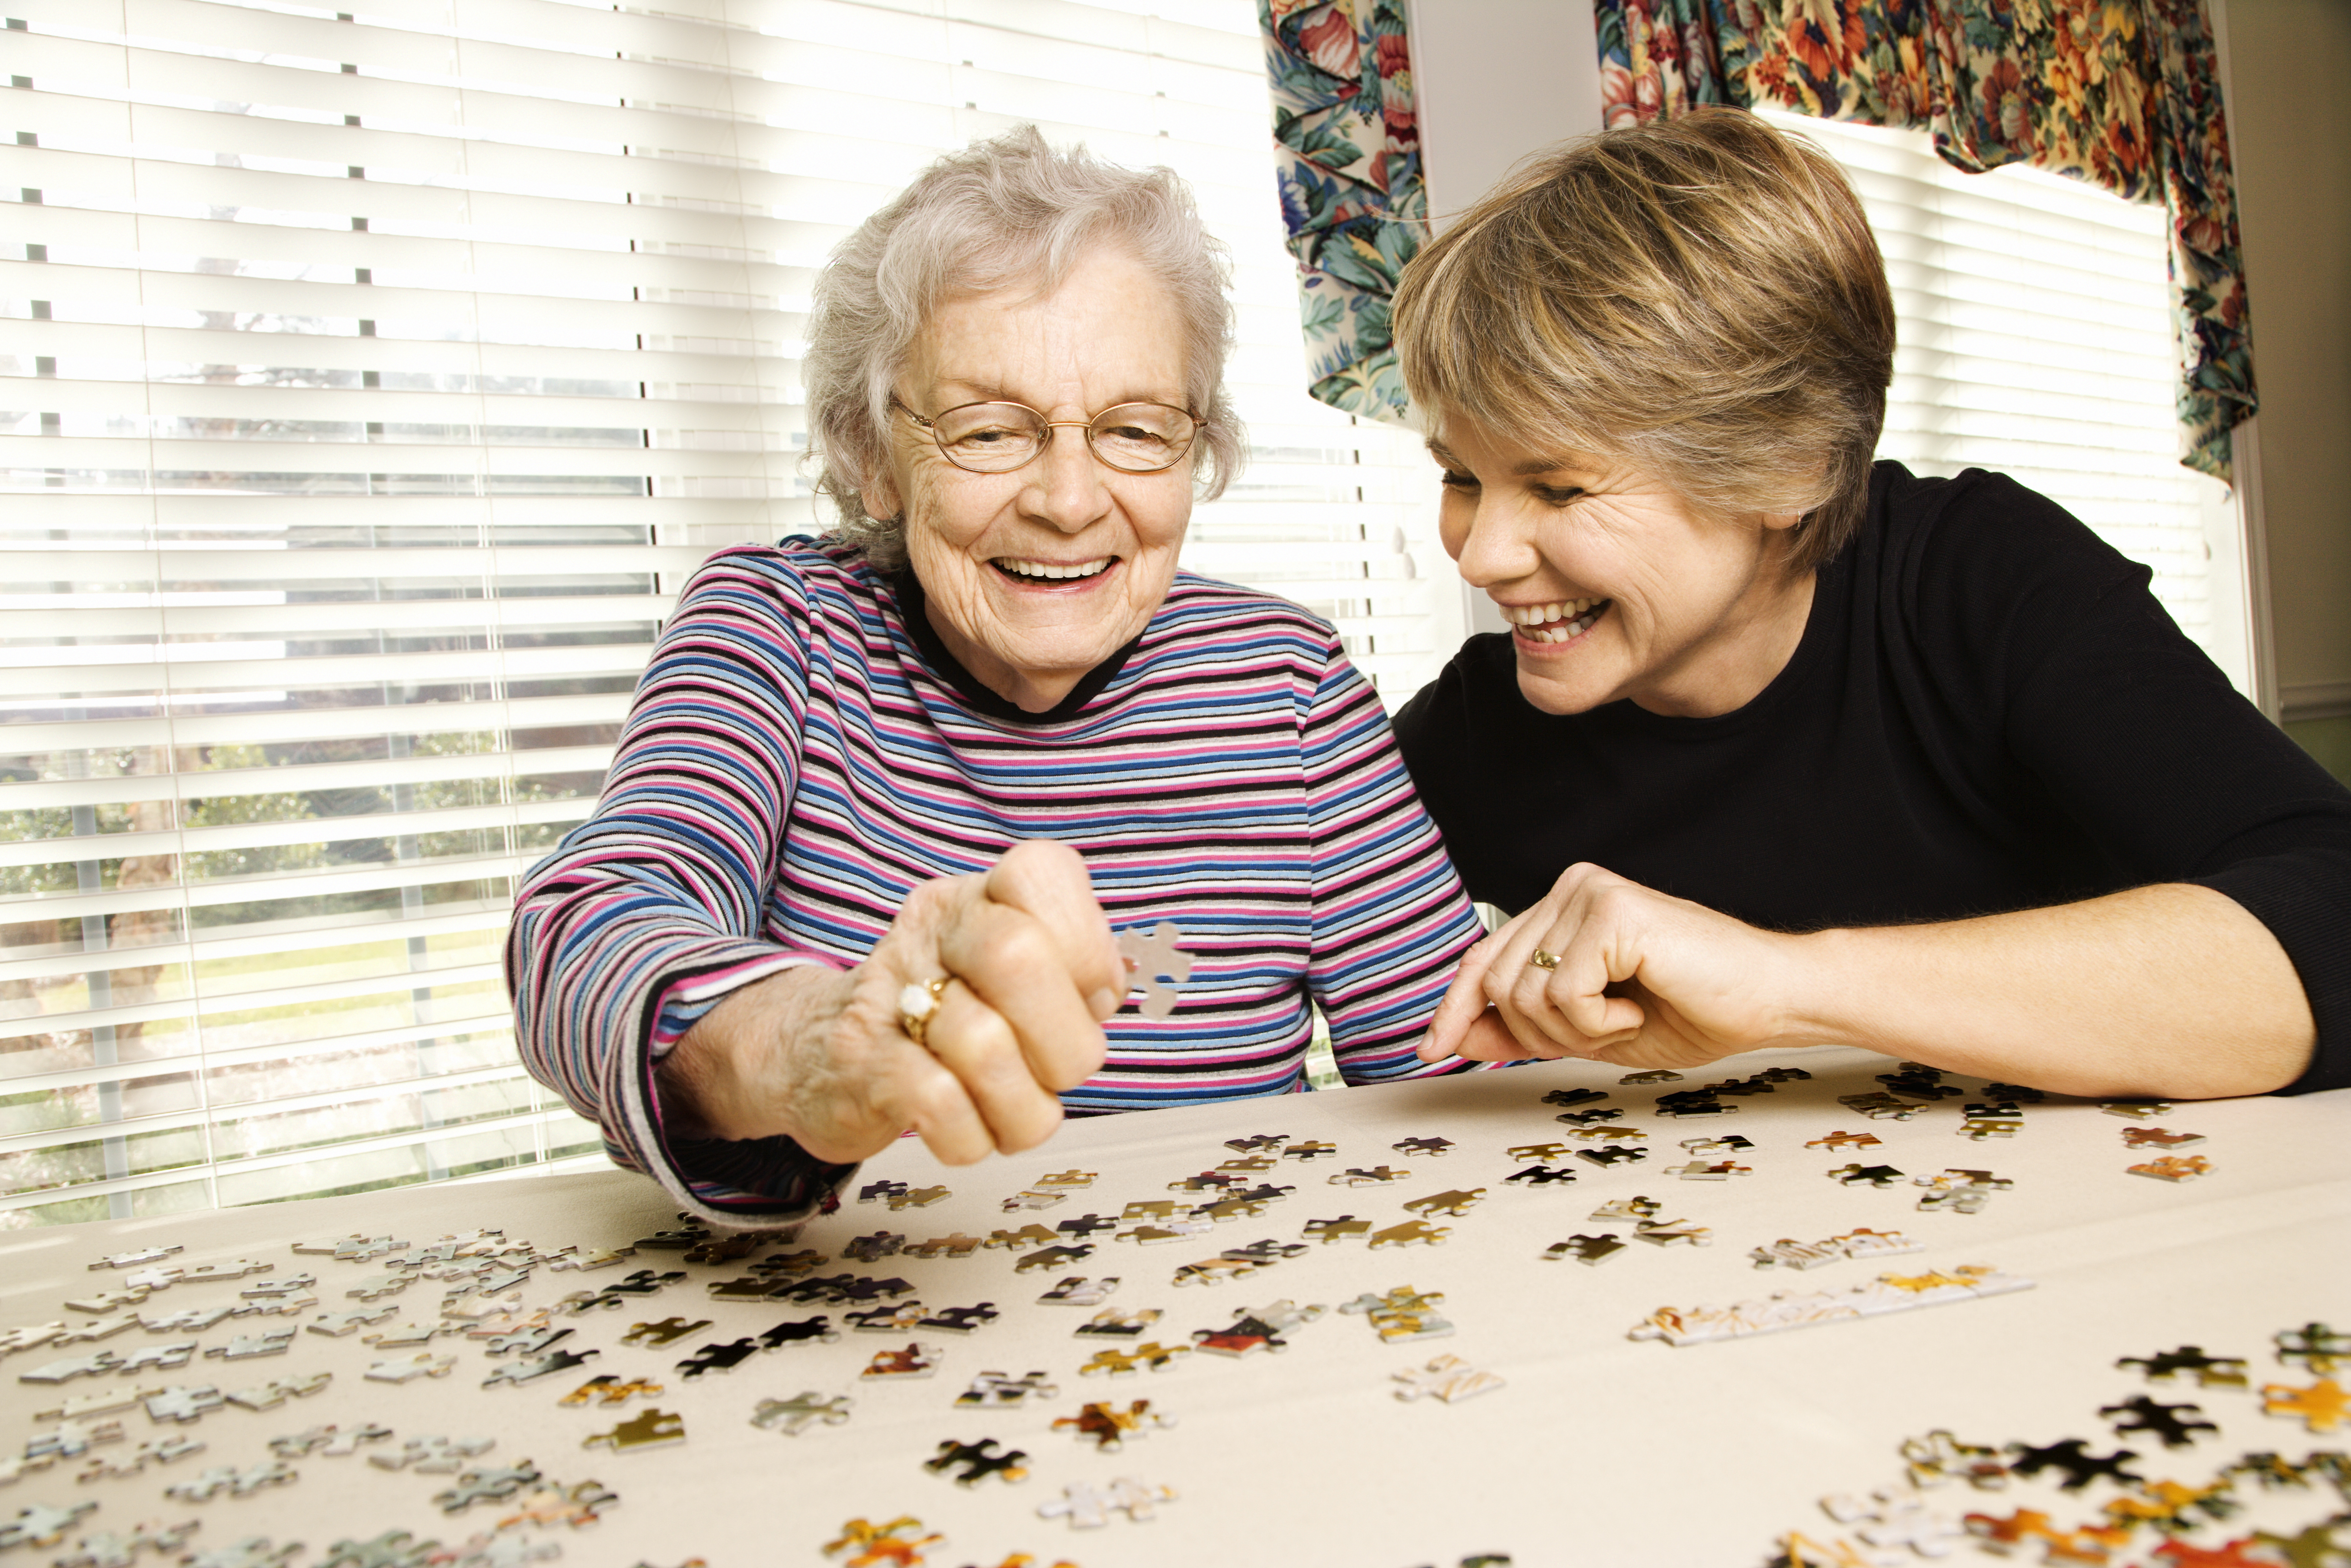 Elderly Woman and Younger Woman Doing a Puzzle